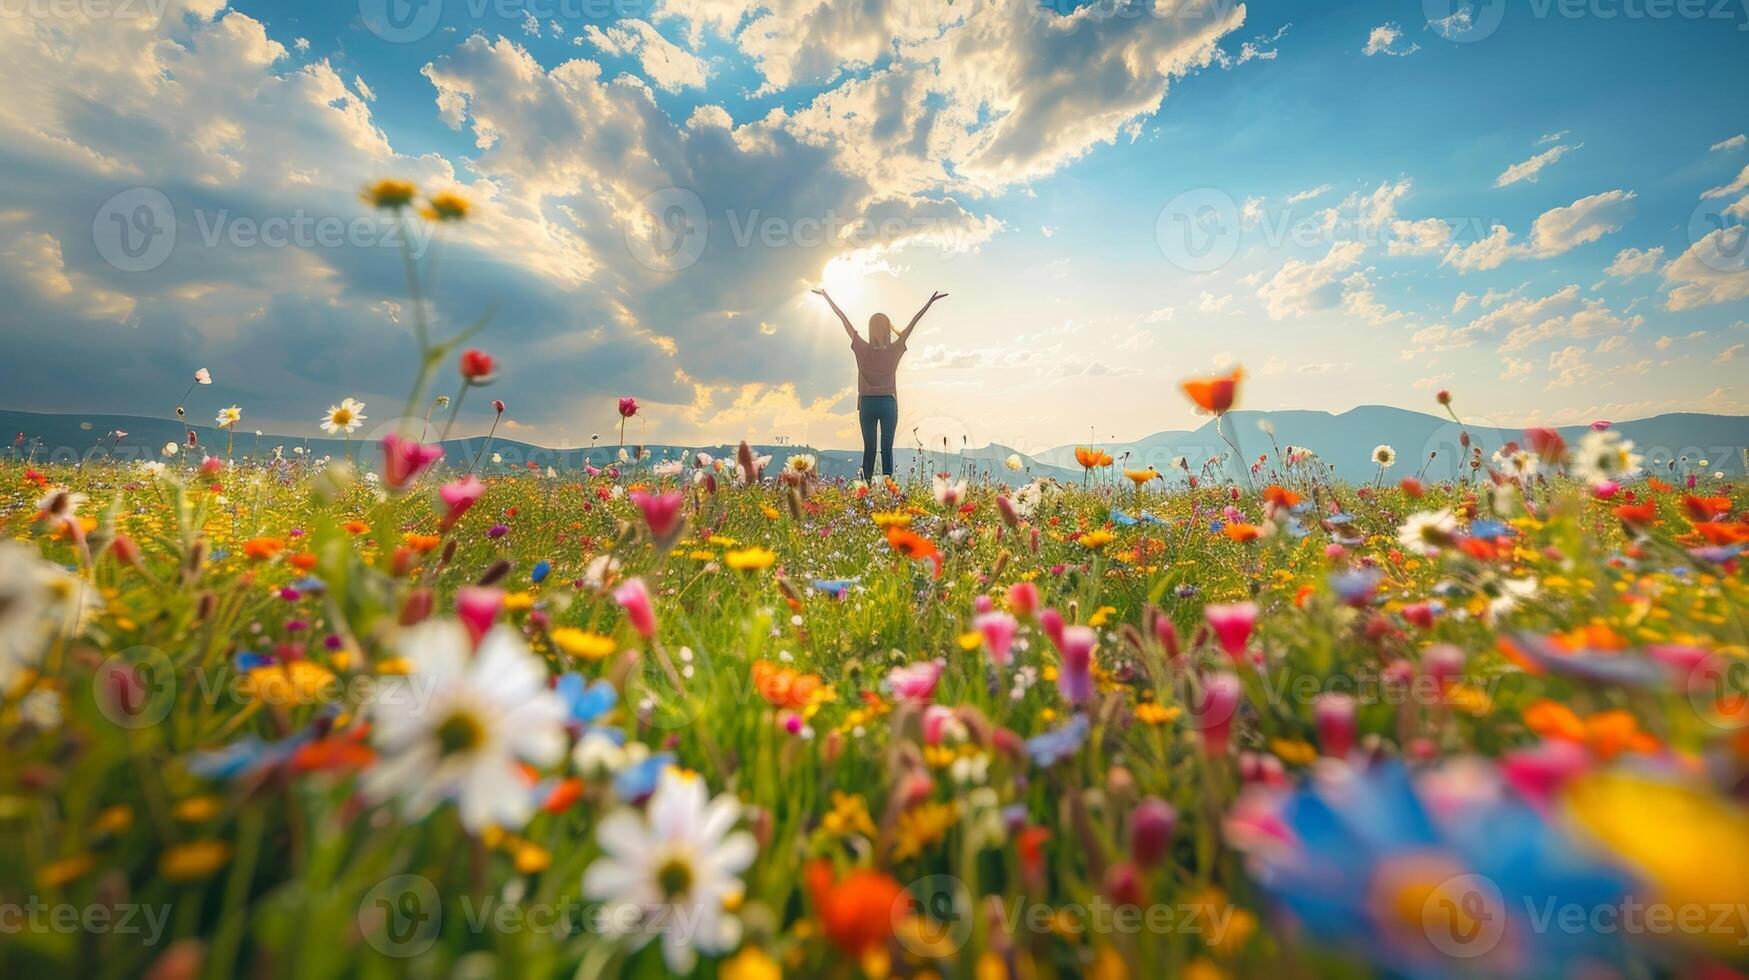 A person stands in a field of wildflowers arms raised to the sky as they practice deep breathing and let go of worries and distractions photo